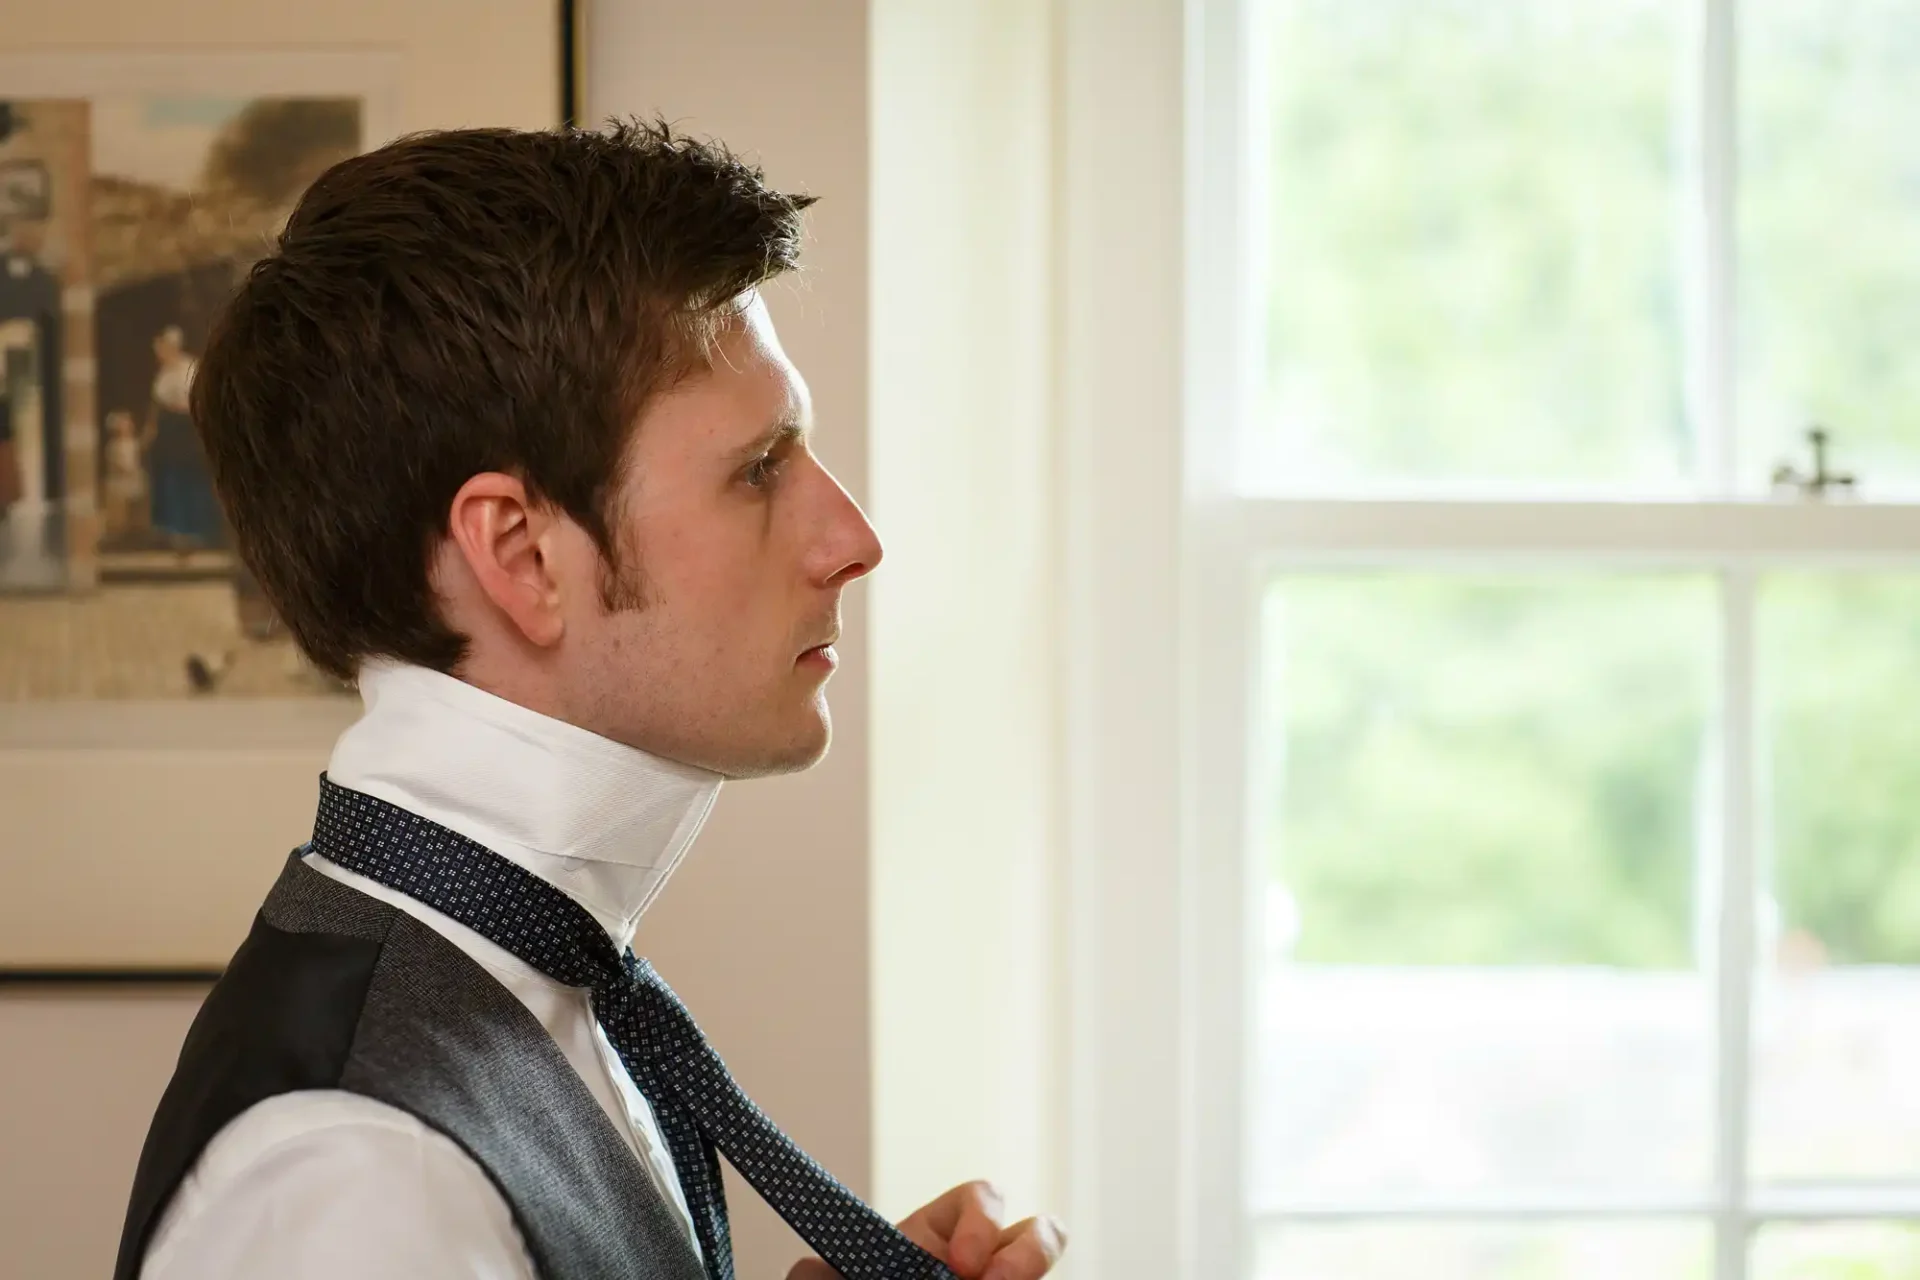 A man in a vest and tie adjusting his tie, looking off to the side with a focused expression, indoors with a window in the background.